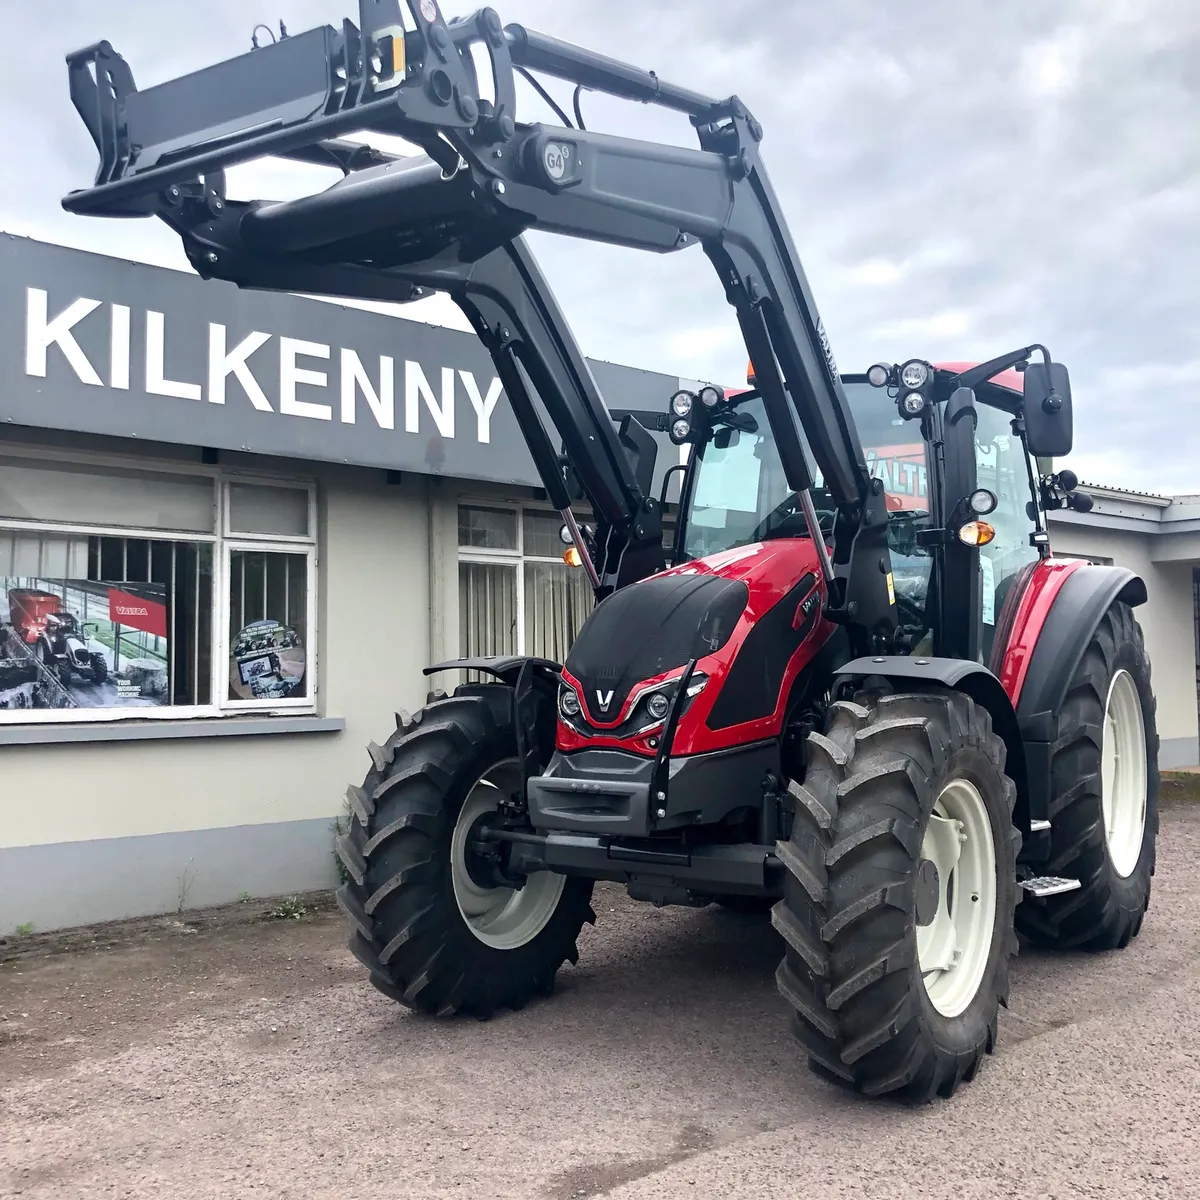 New Valtra G125s Available for Delivery